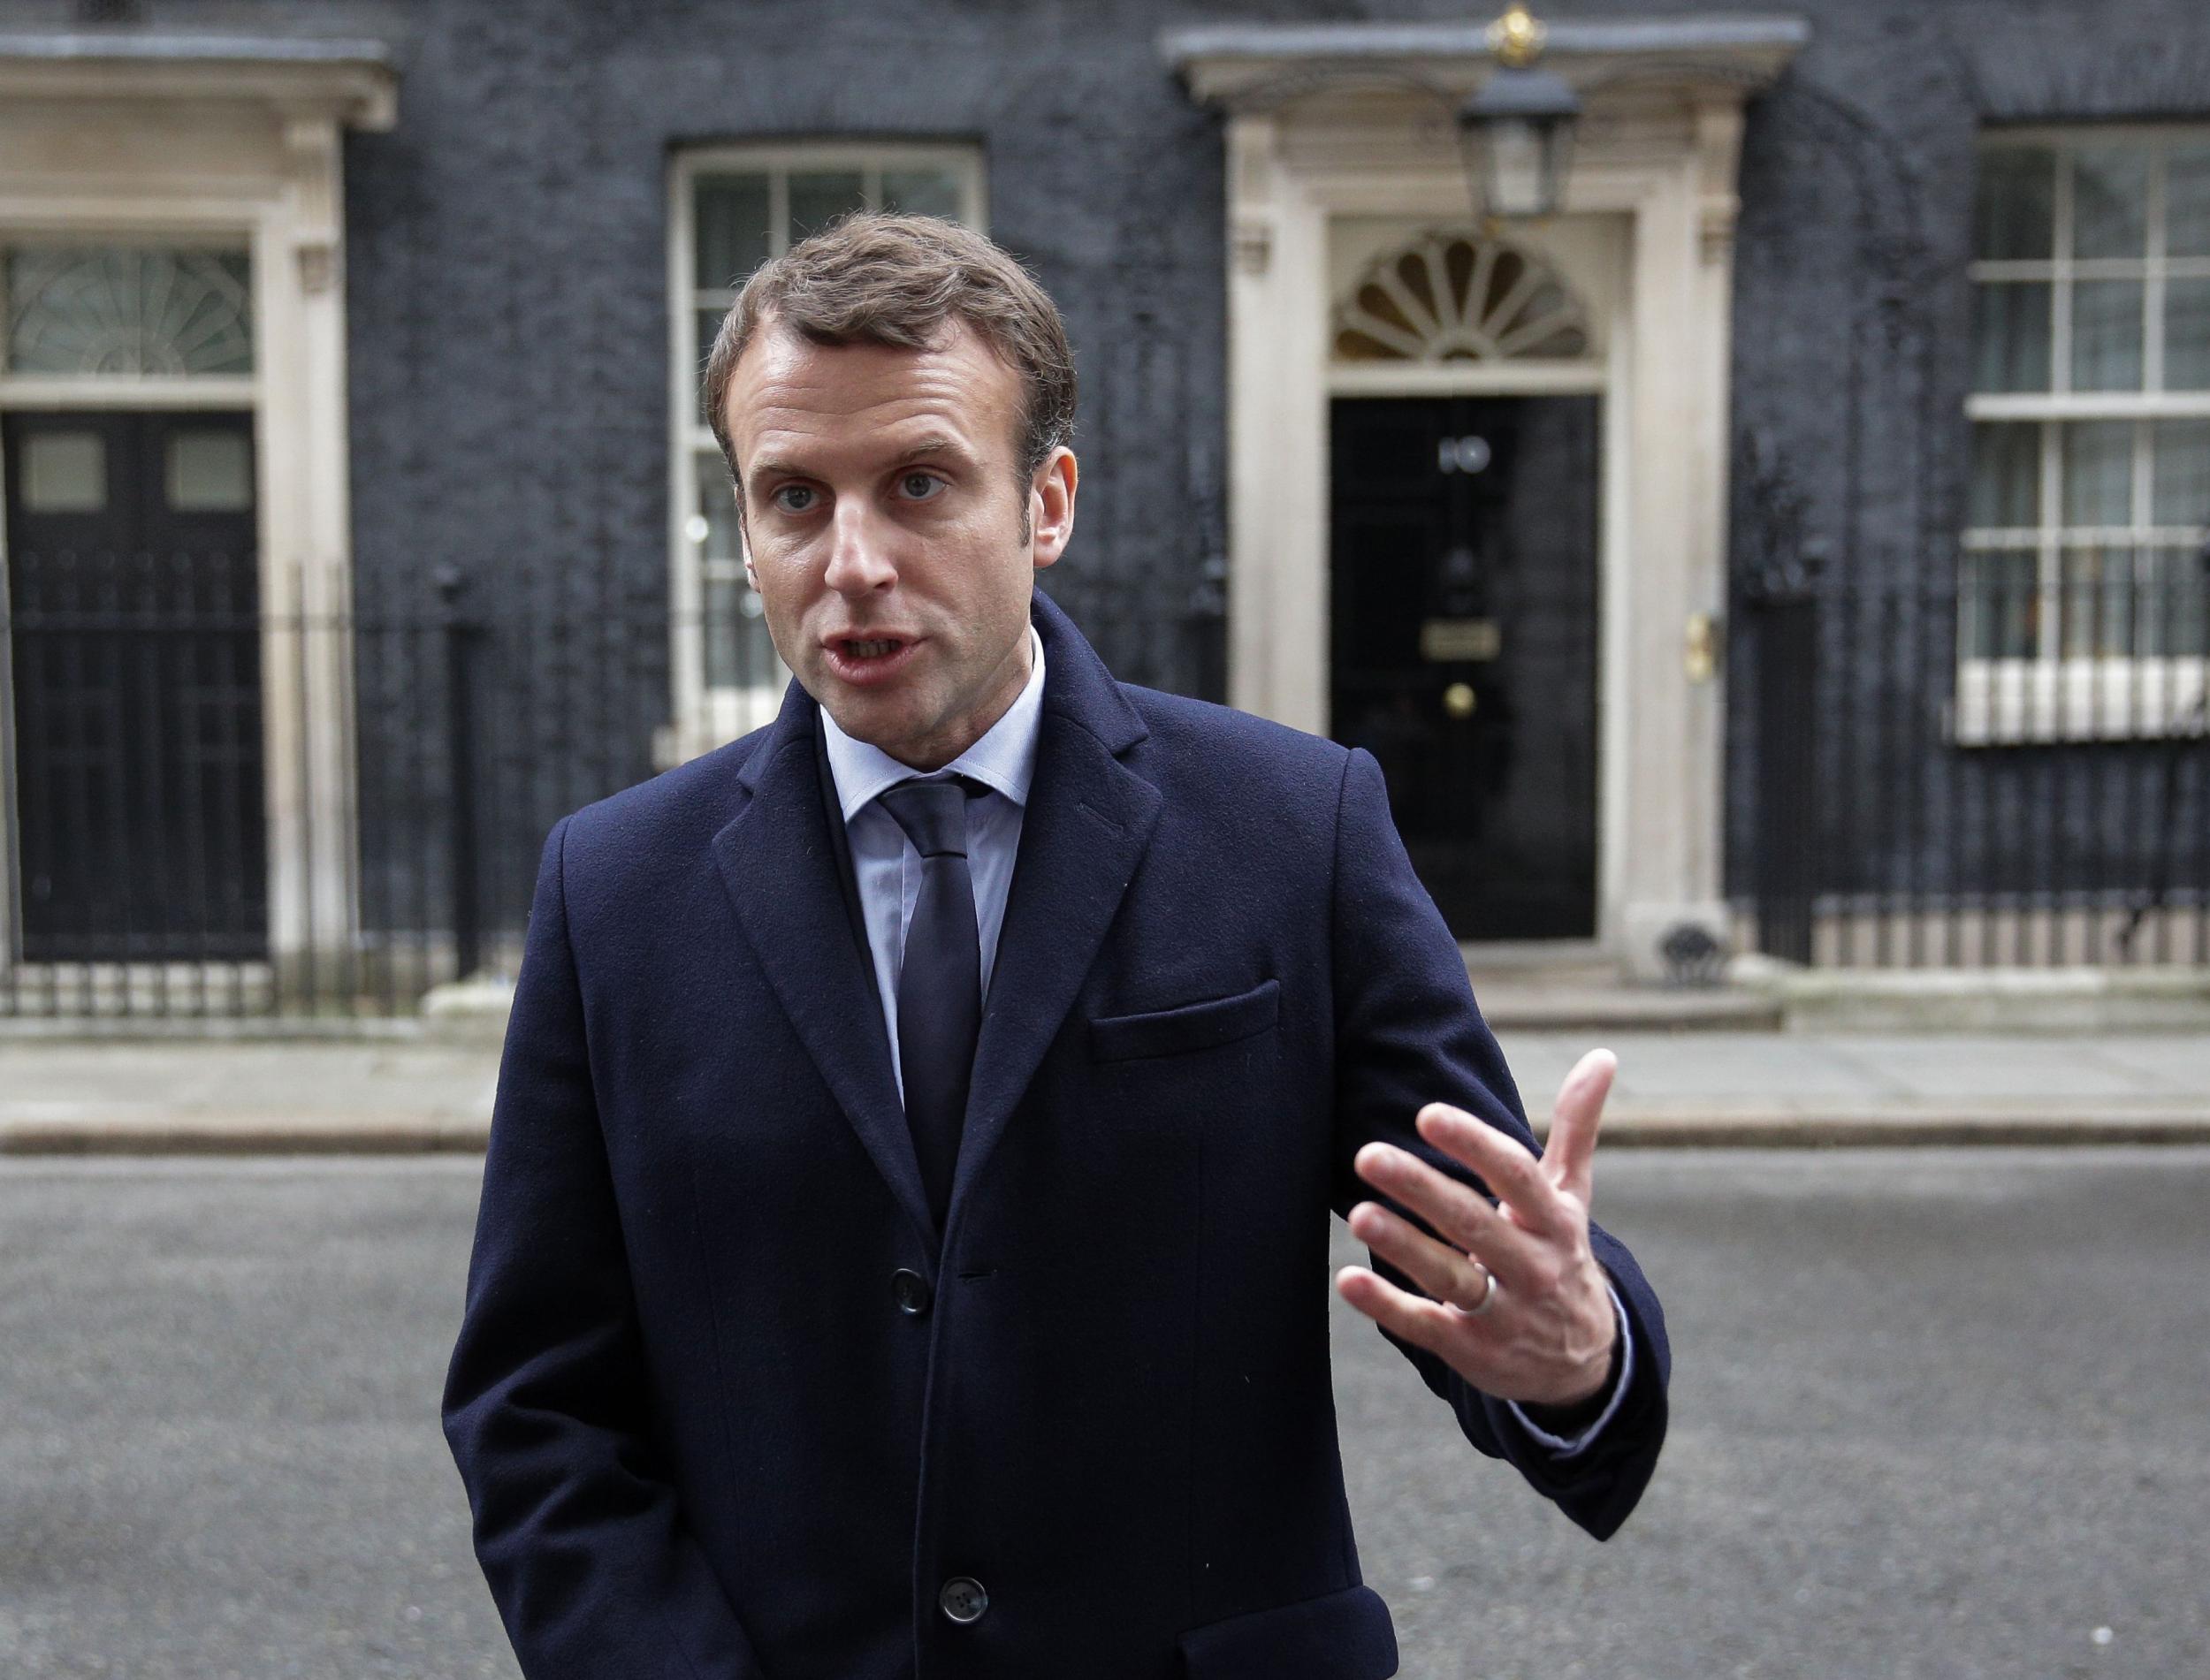 French presidential election candidate Emmanuel Macron addresses the media outside 10 Downing Street